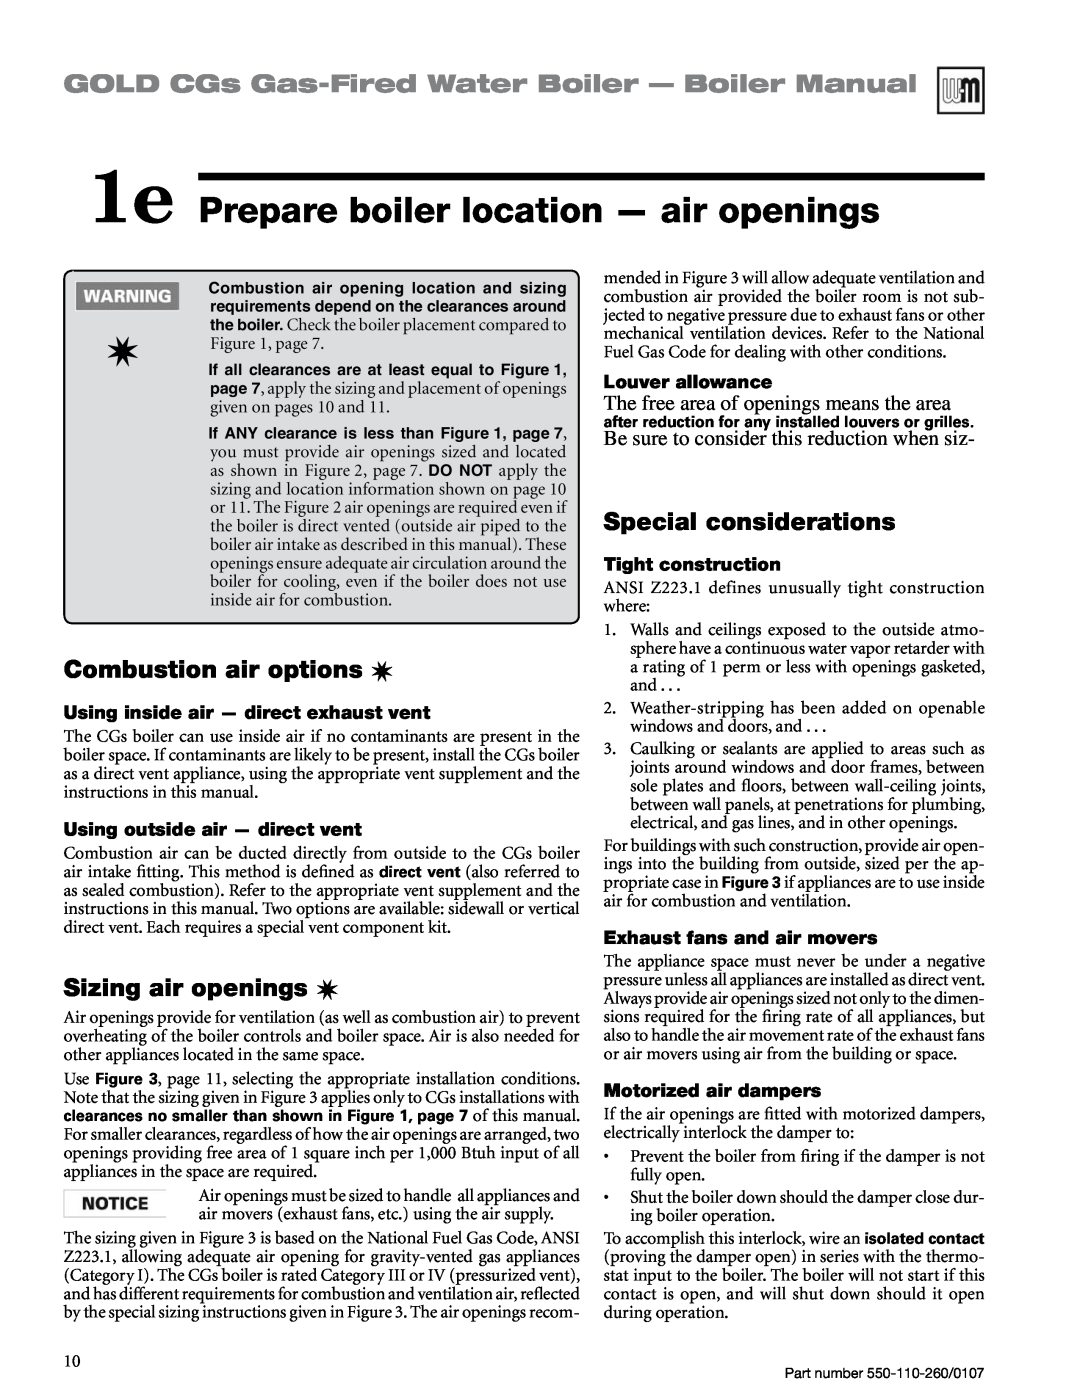 Weil-McLain 550-110-260/0107 1e Prepare boiler location — air openings, Combustion air options, Special considerations 